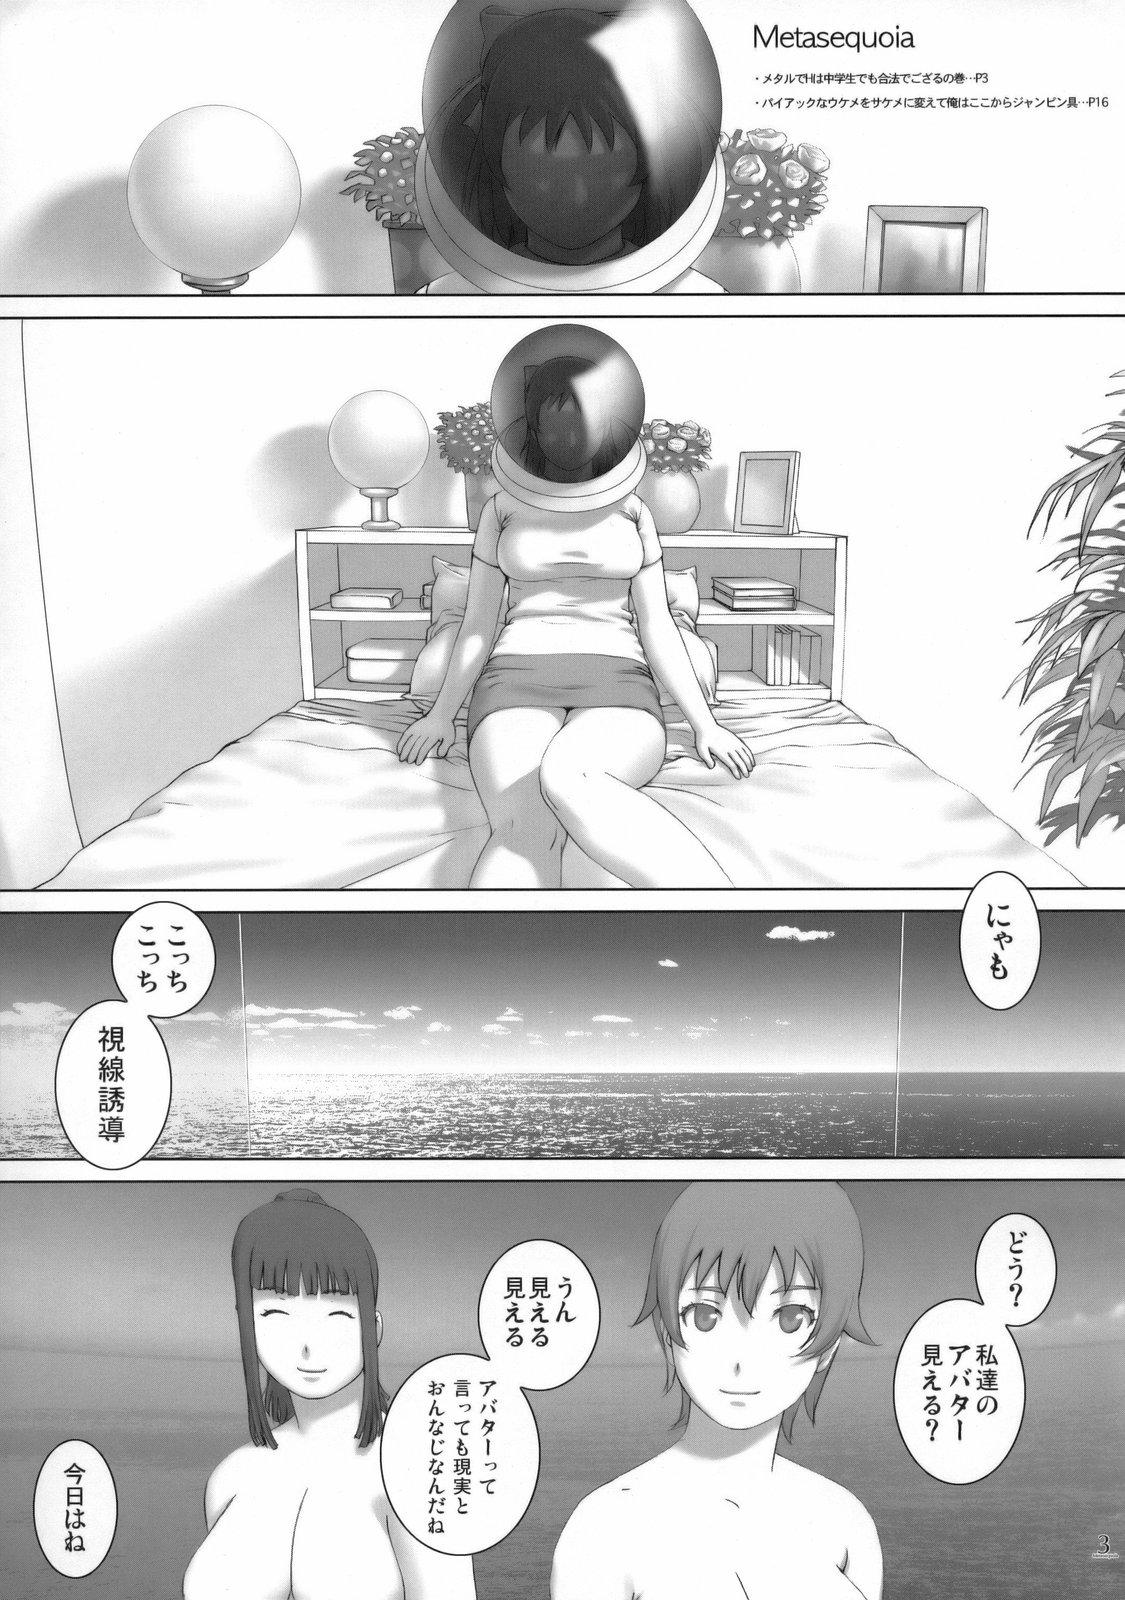 Chick Metasequoia - Real drive Tan - Page 2